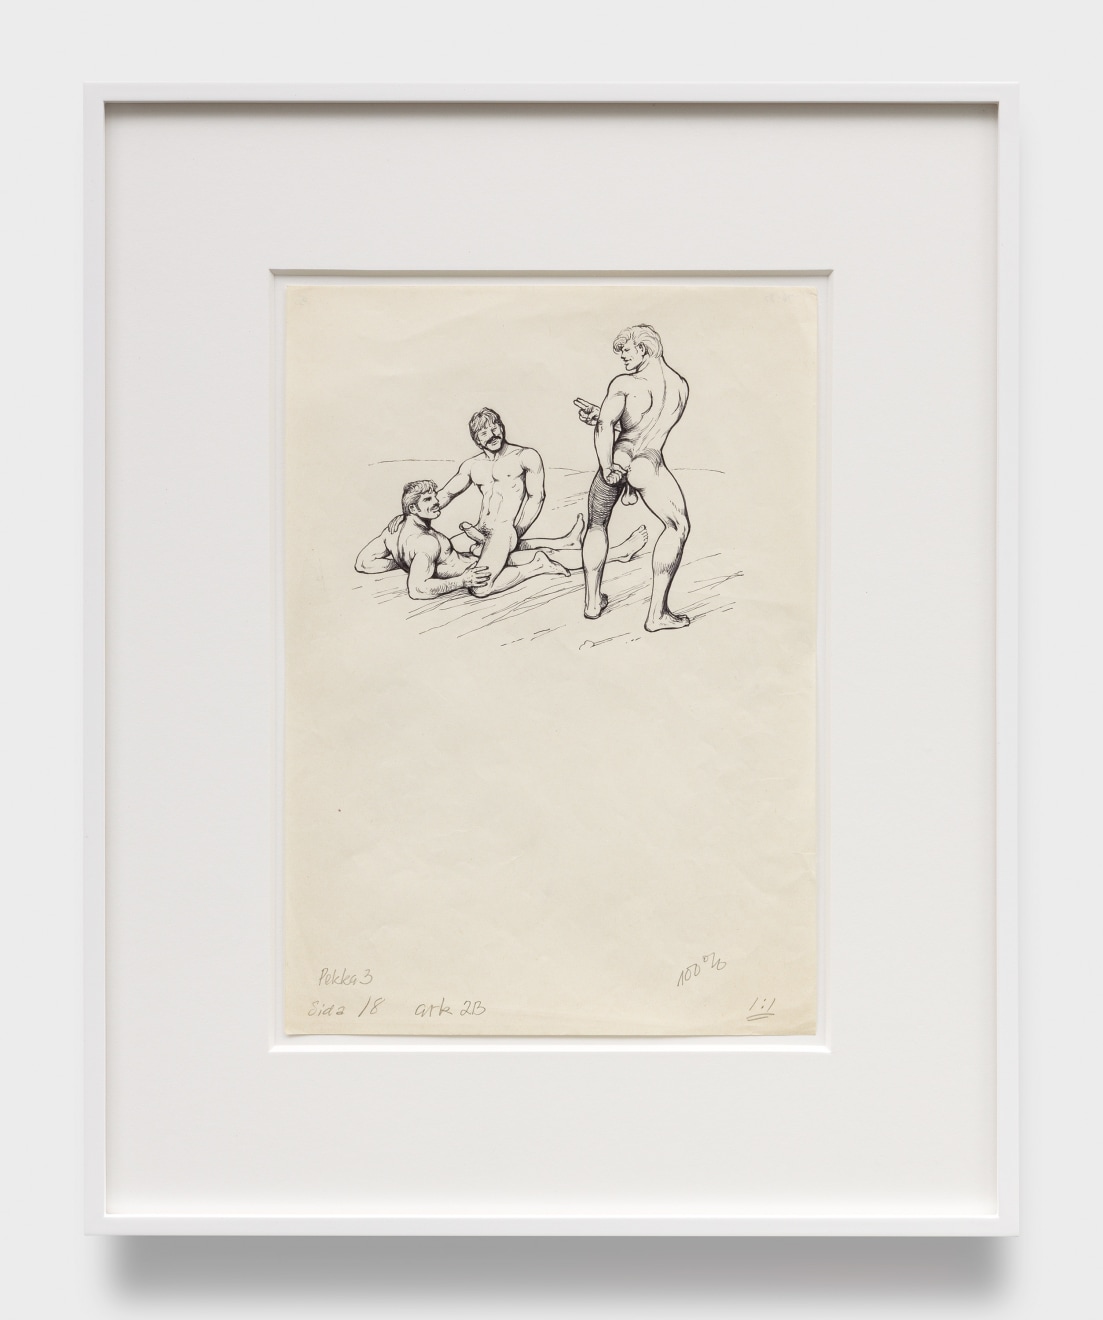 Tom of Finland, Untitled (from &quot;Camping&quot;), 1976